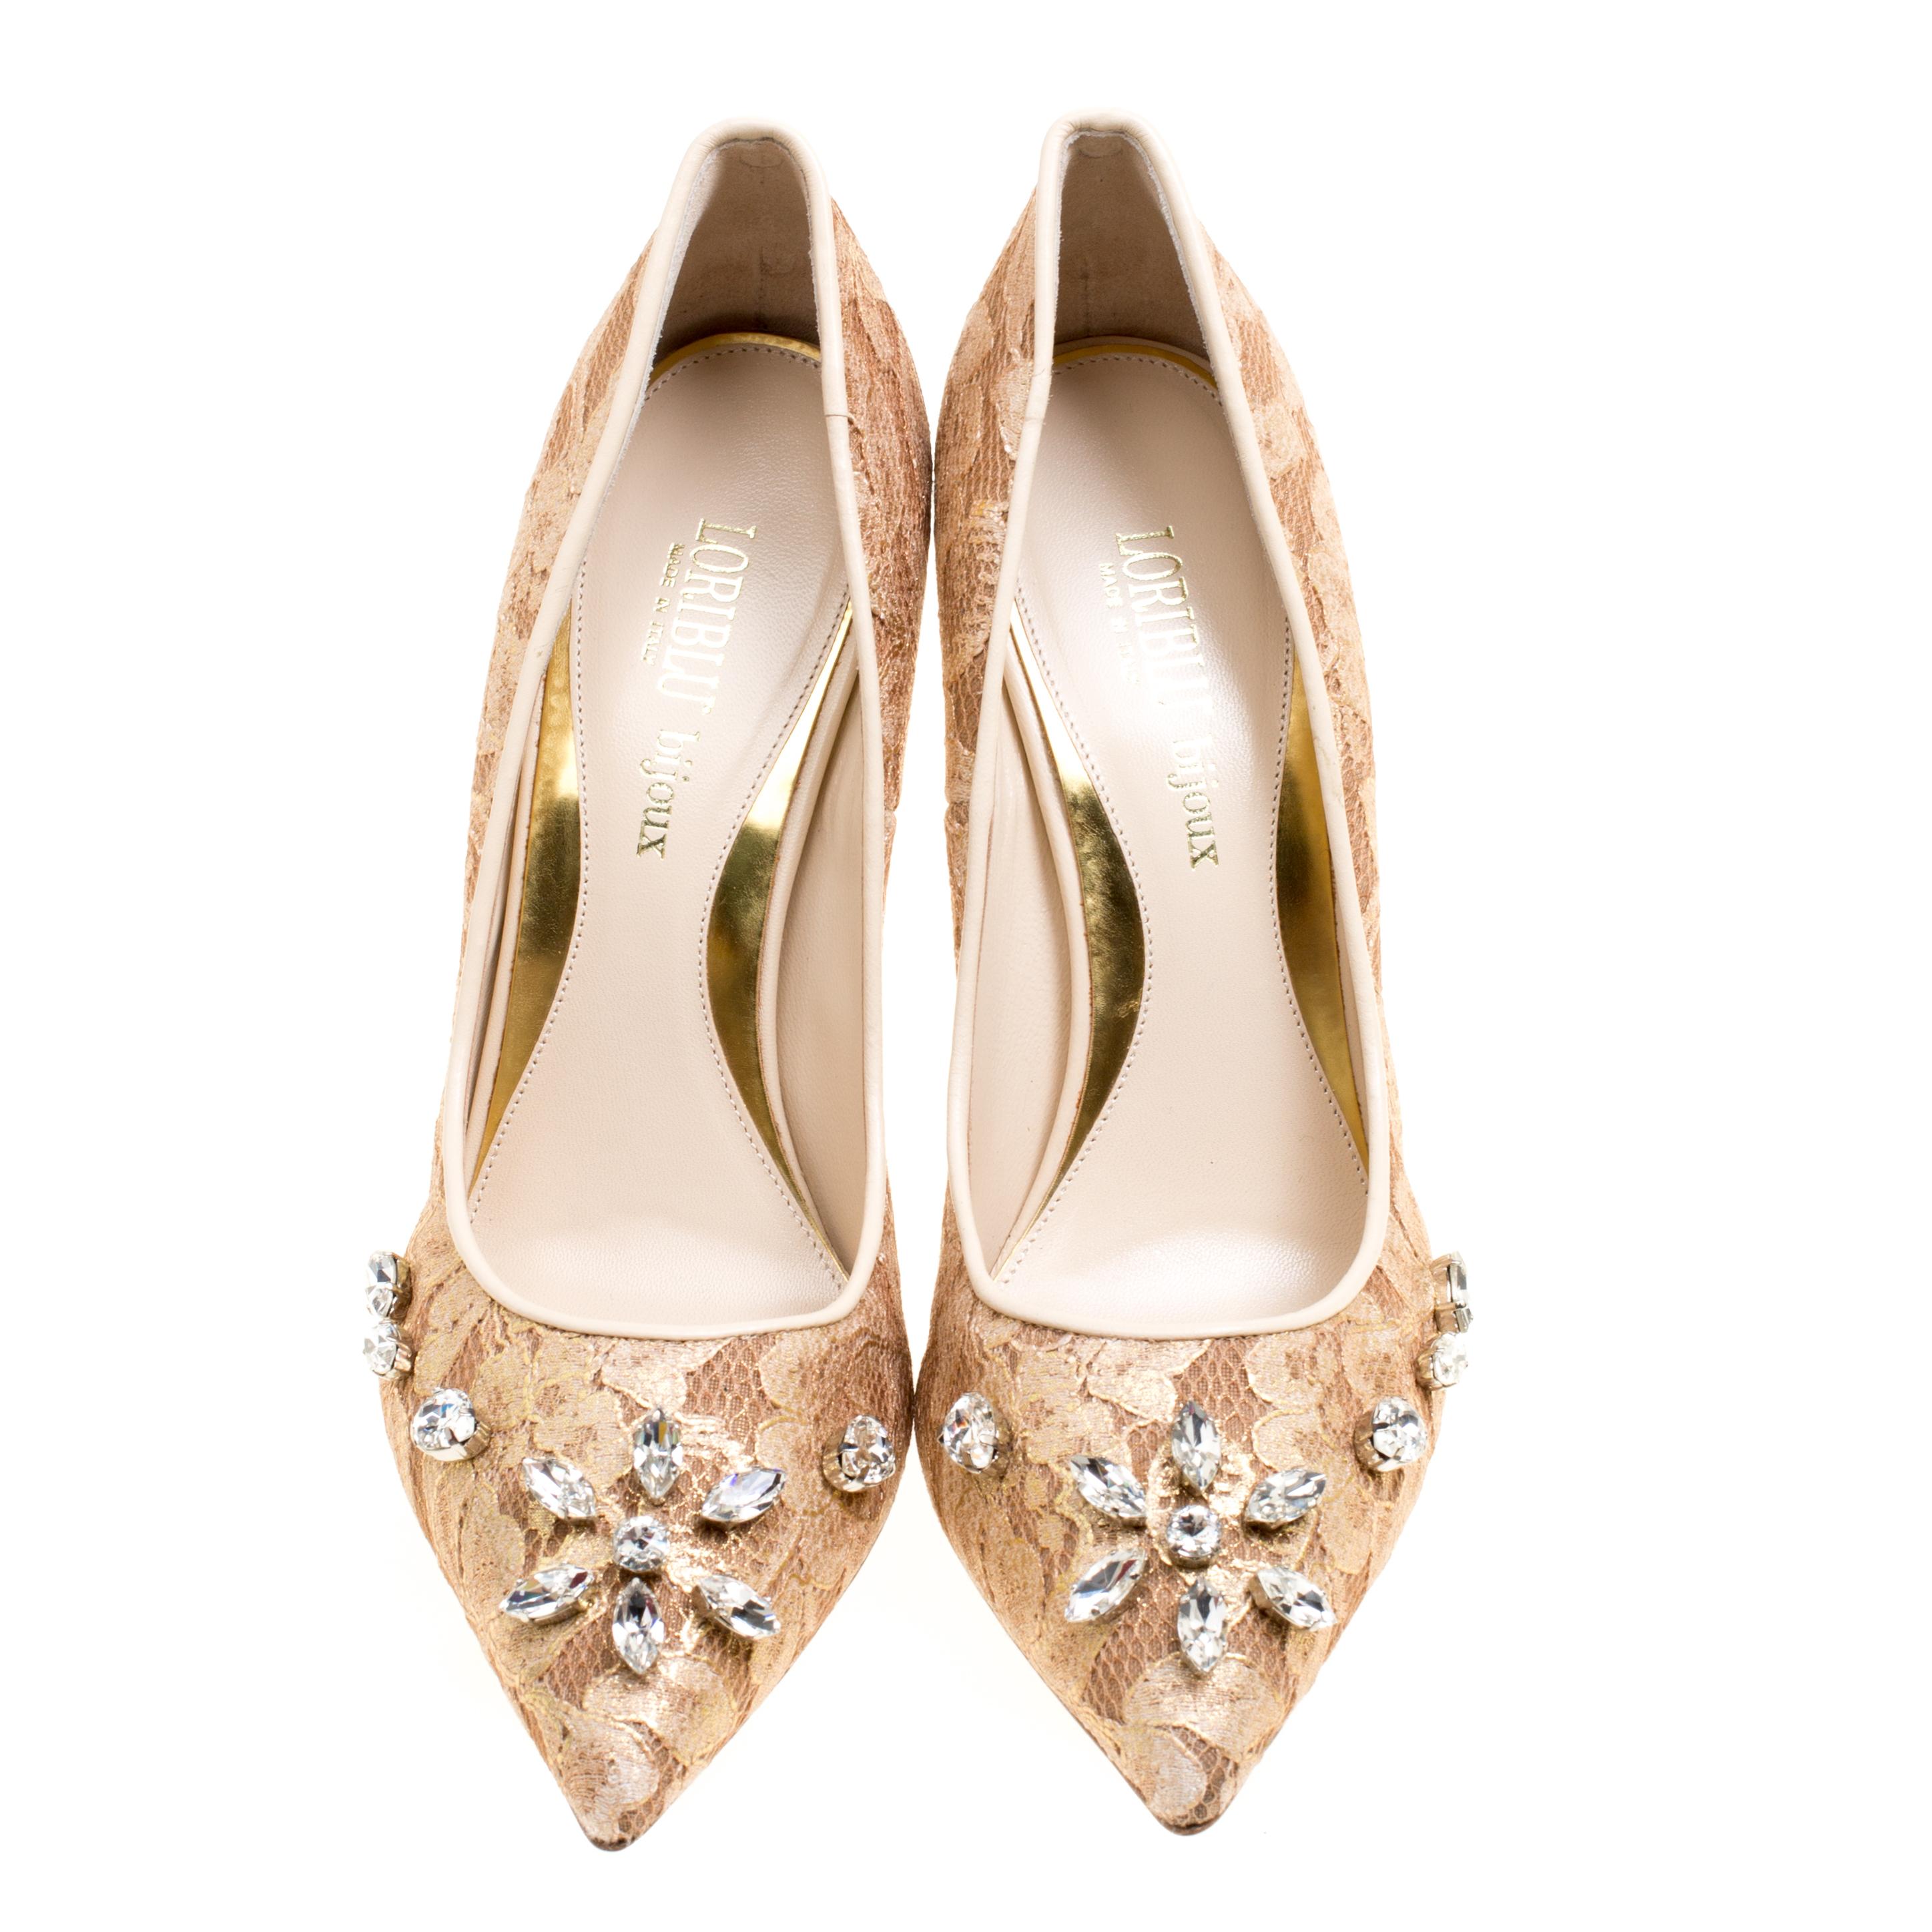 These beige pumps are crafted from a combination of lace, mesh and leather and feature an elegant silhouette. They flaunt pointed toes with exquisite crystal embellishments and come equipped with leather-lined insoles and 11 cm stiletto heels. Pair